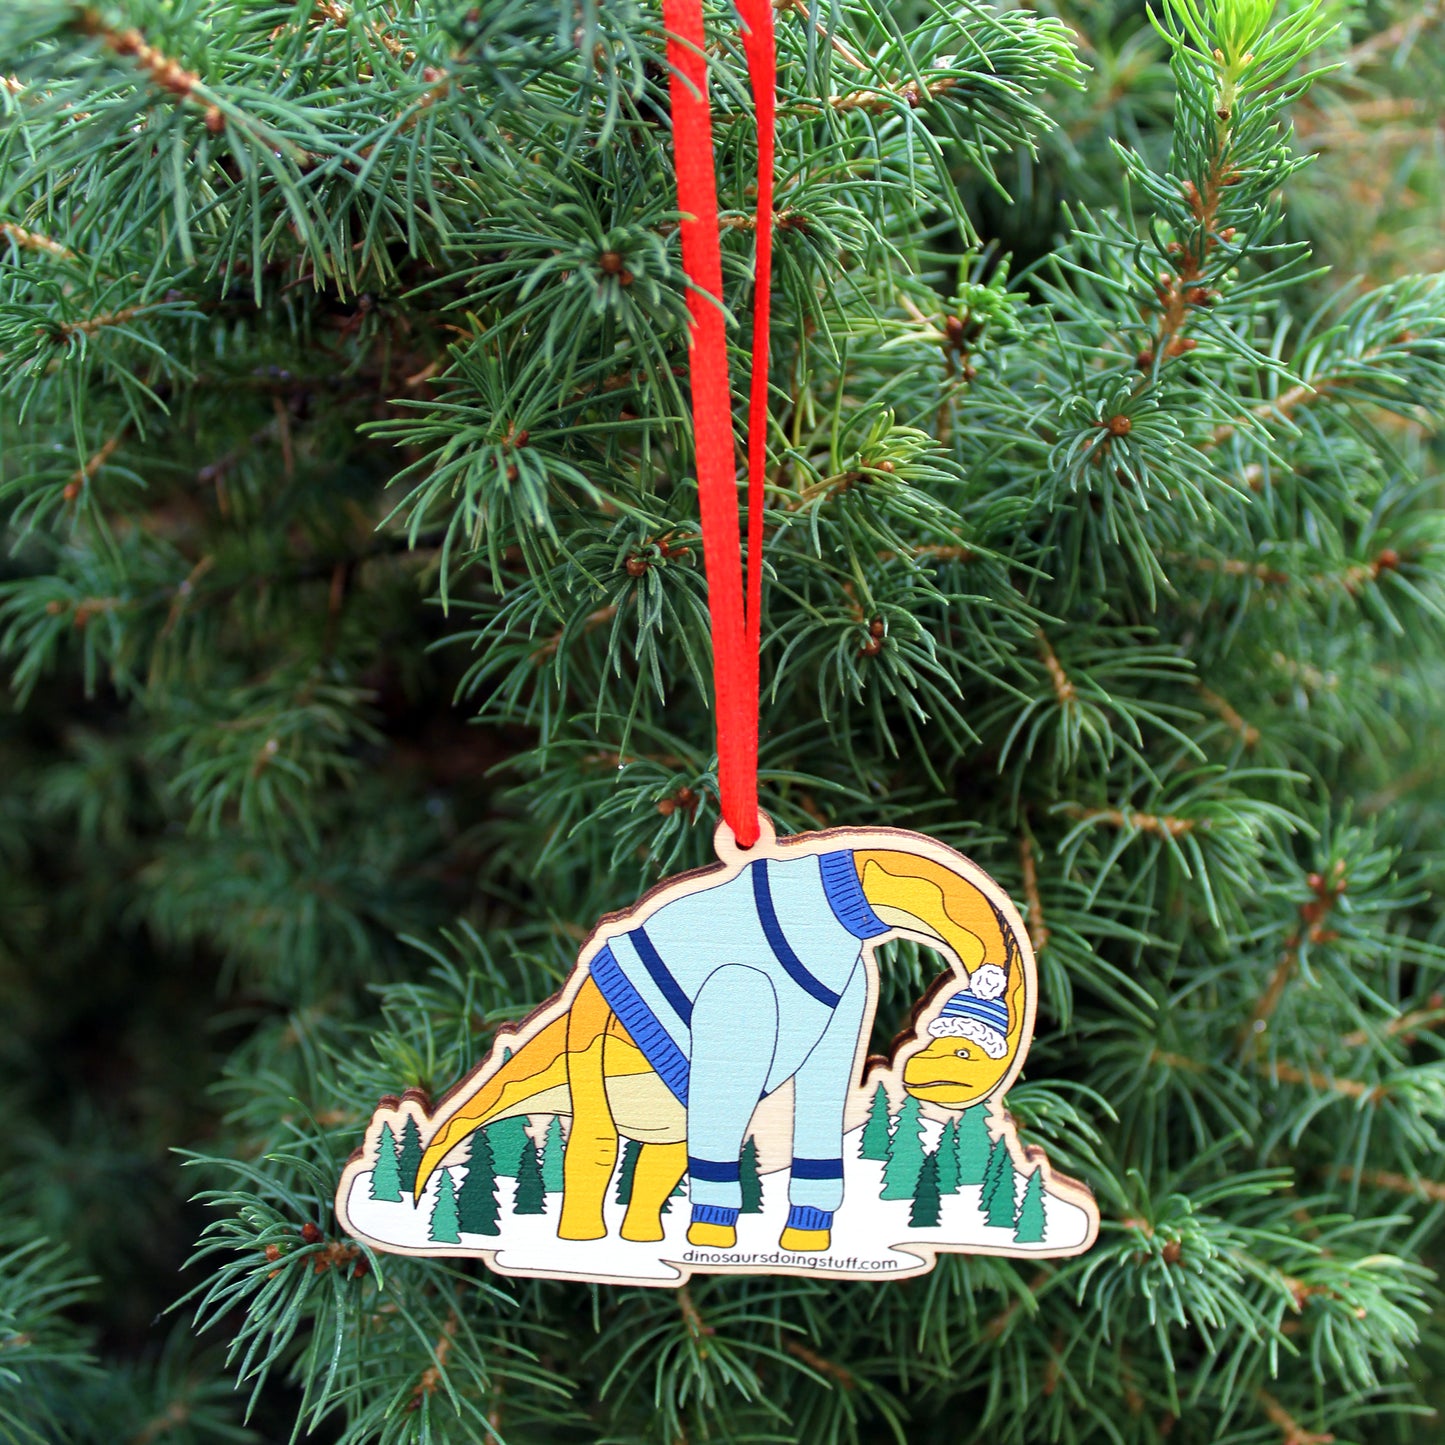 wooden ugly Christmas jumper decoration hanging on a Christmas tree